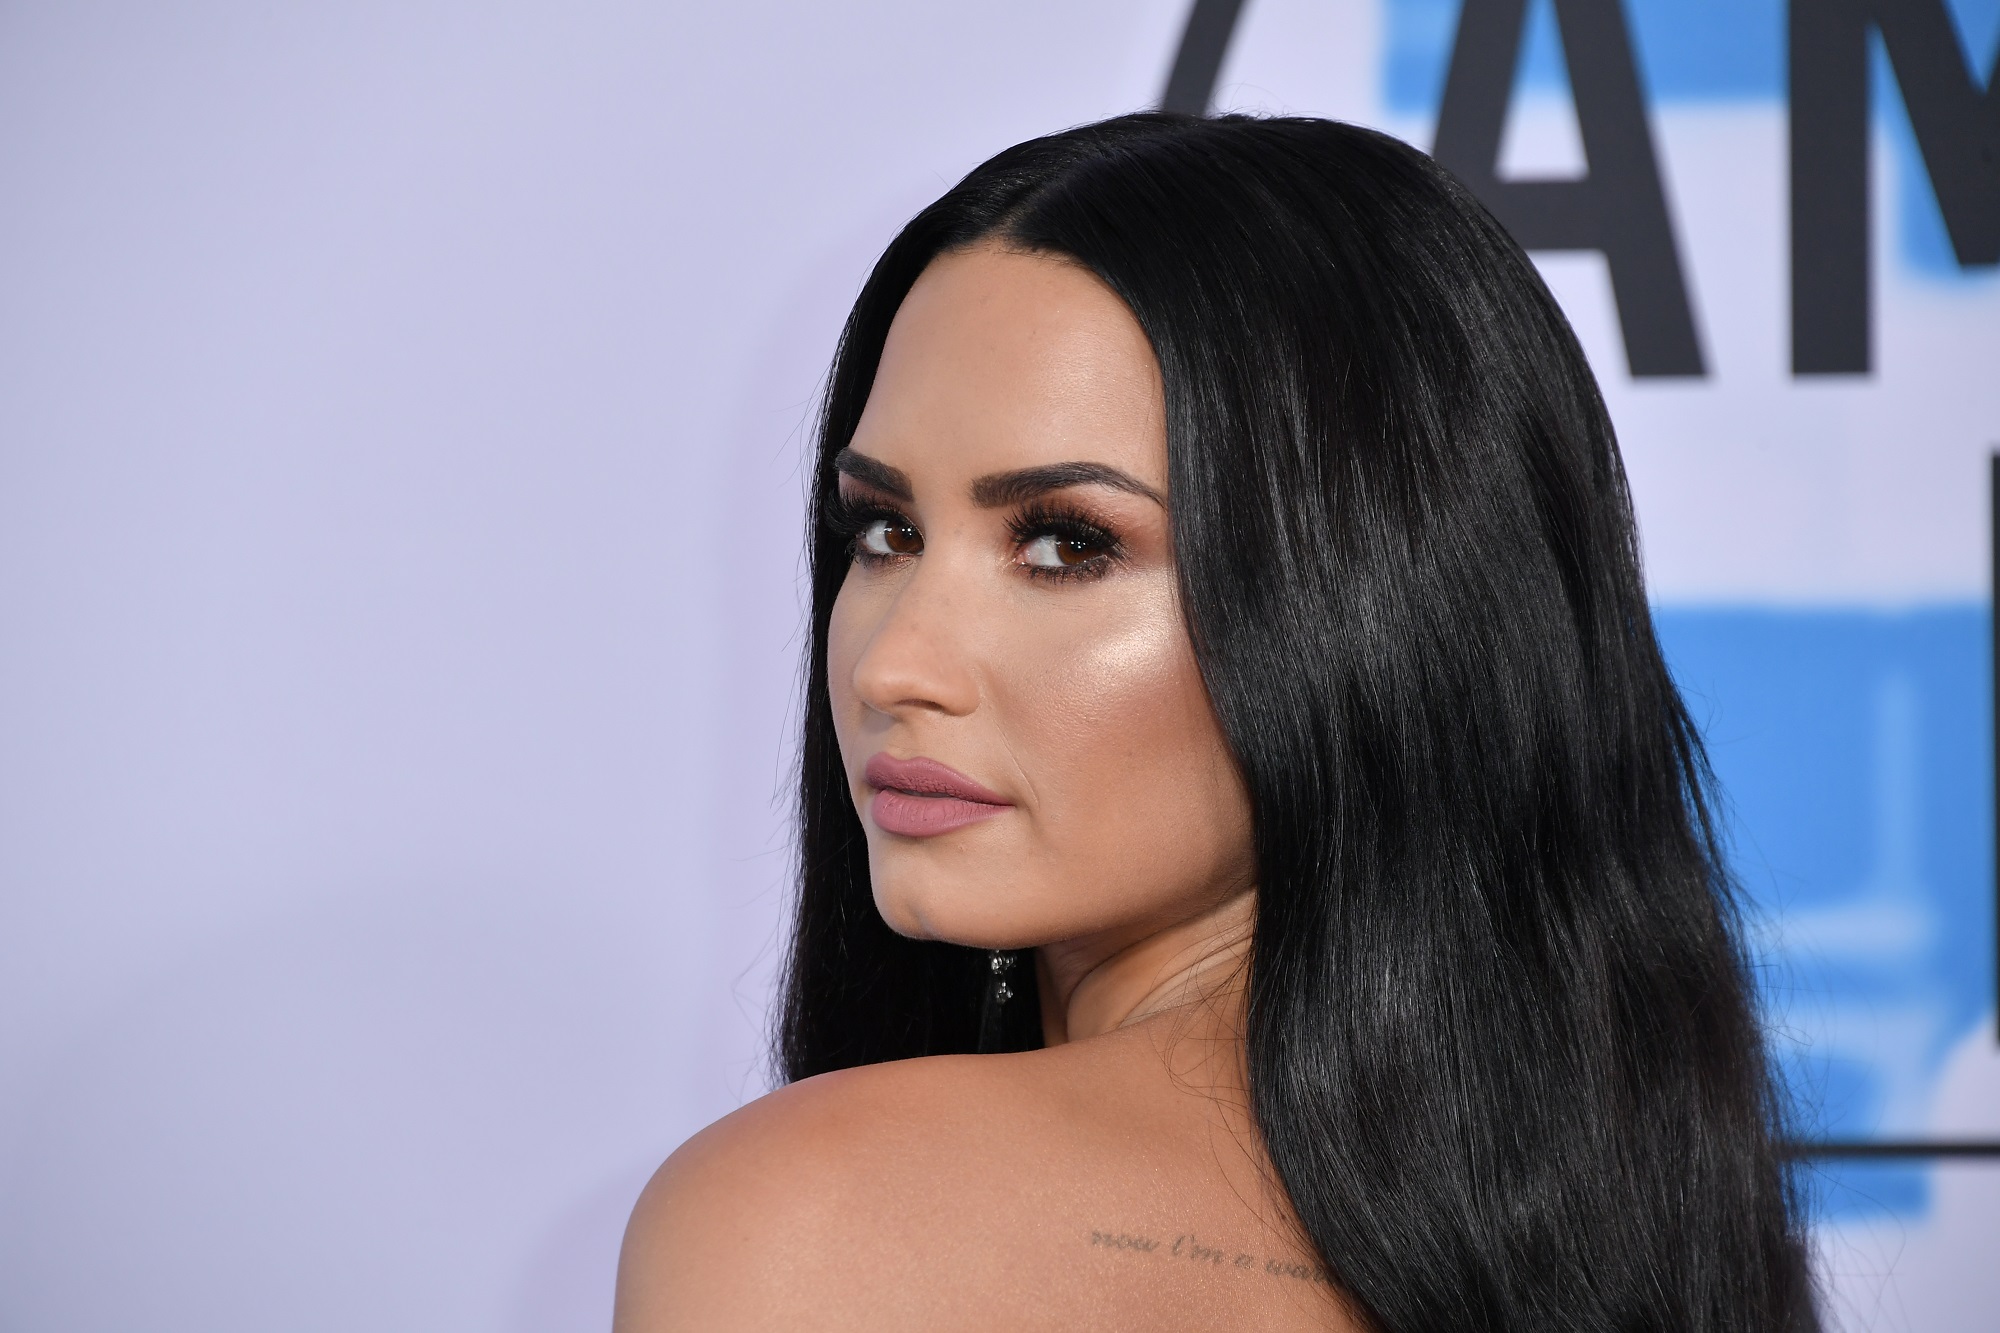 Demi Lovato attends the 2017 American Music Awards on November 19, 2017, in Los Angeles, California.